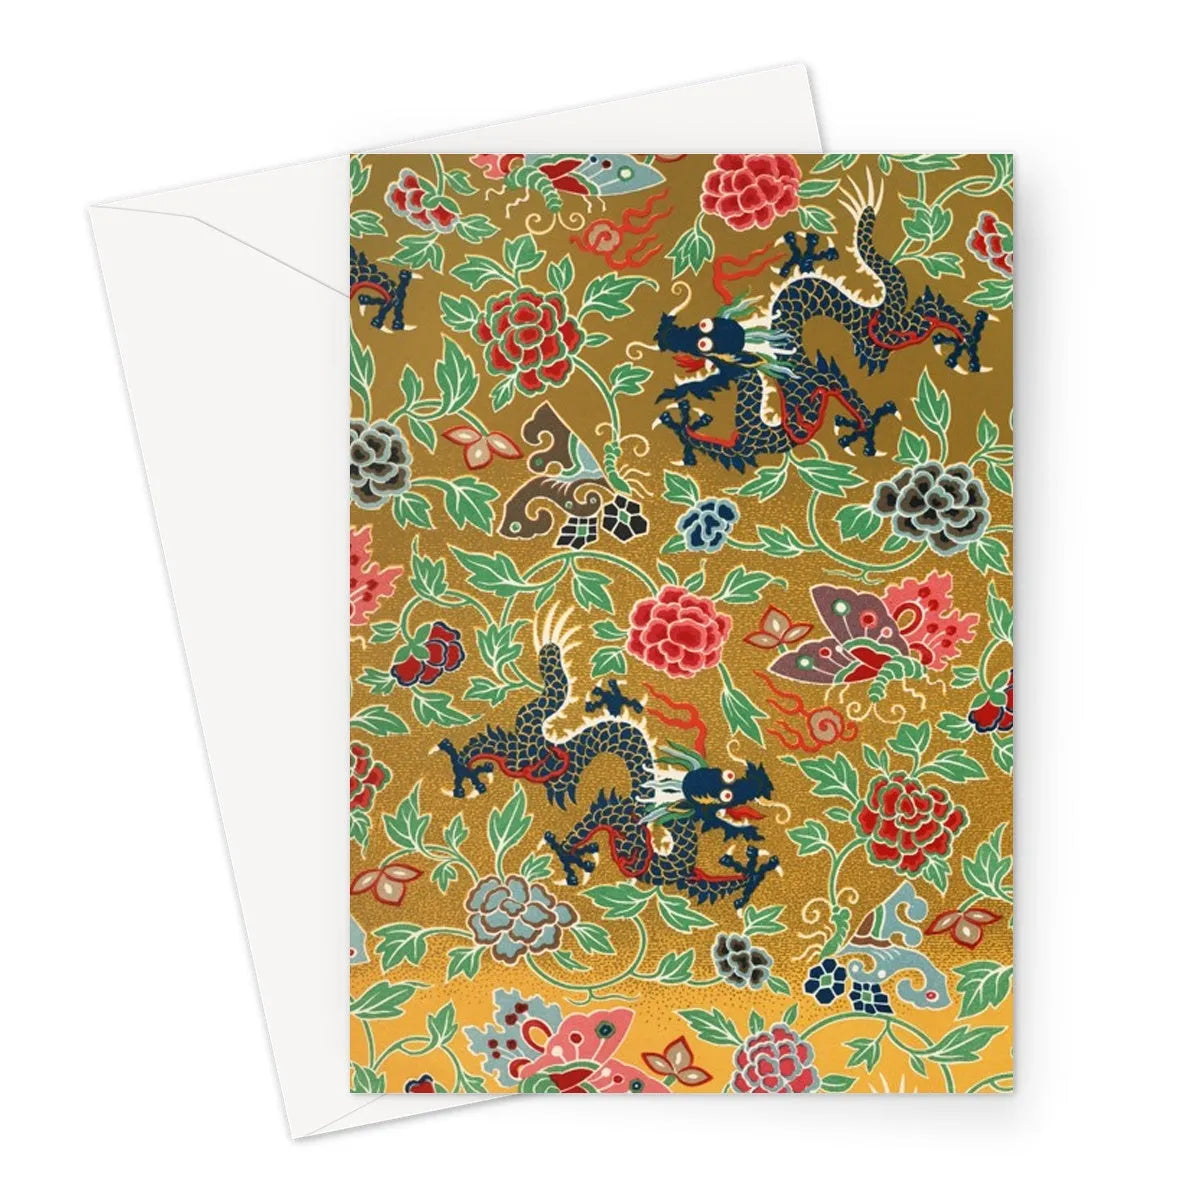 Chinese And Japanese Pattern By Auguste Racinet Greeting Card - A5 Portrait / 1 Card - Greeting & Note Cards